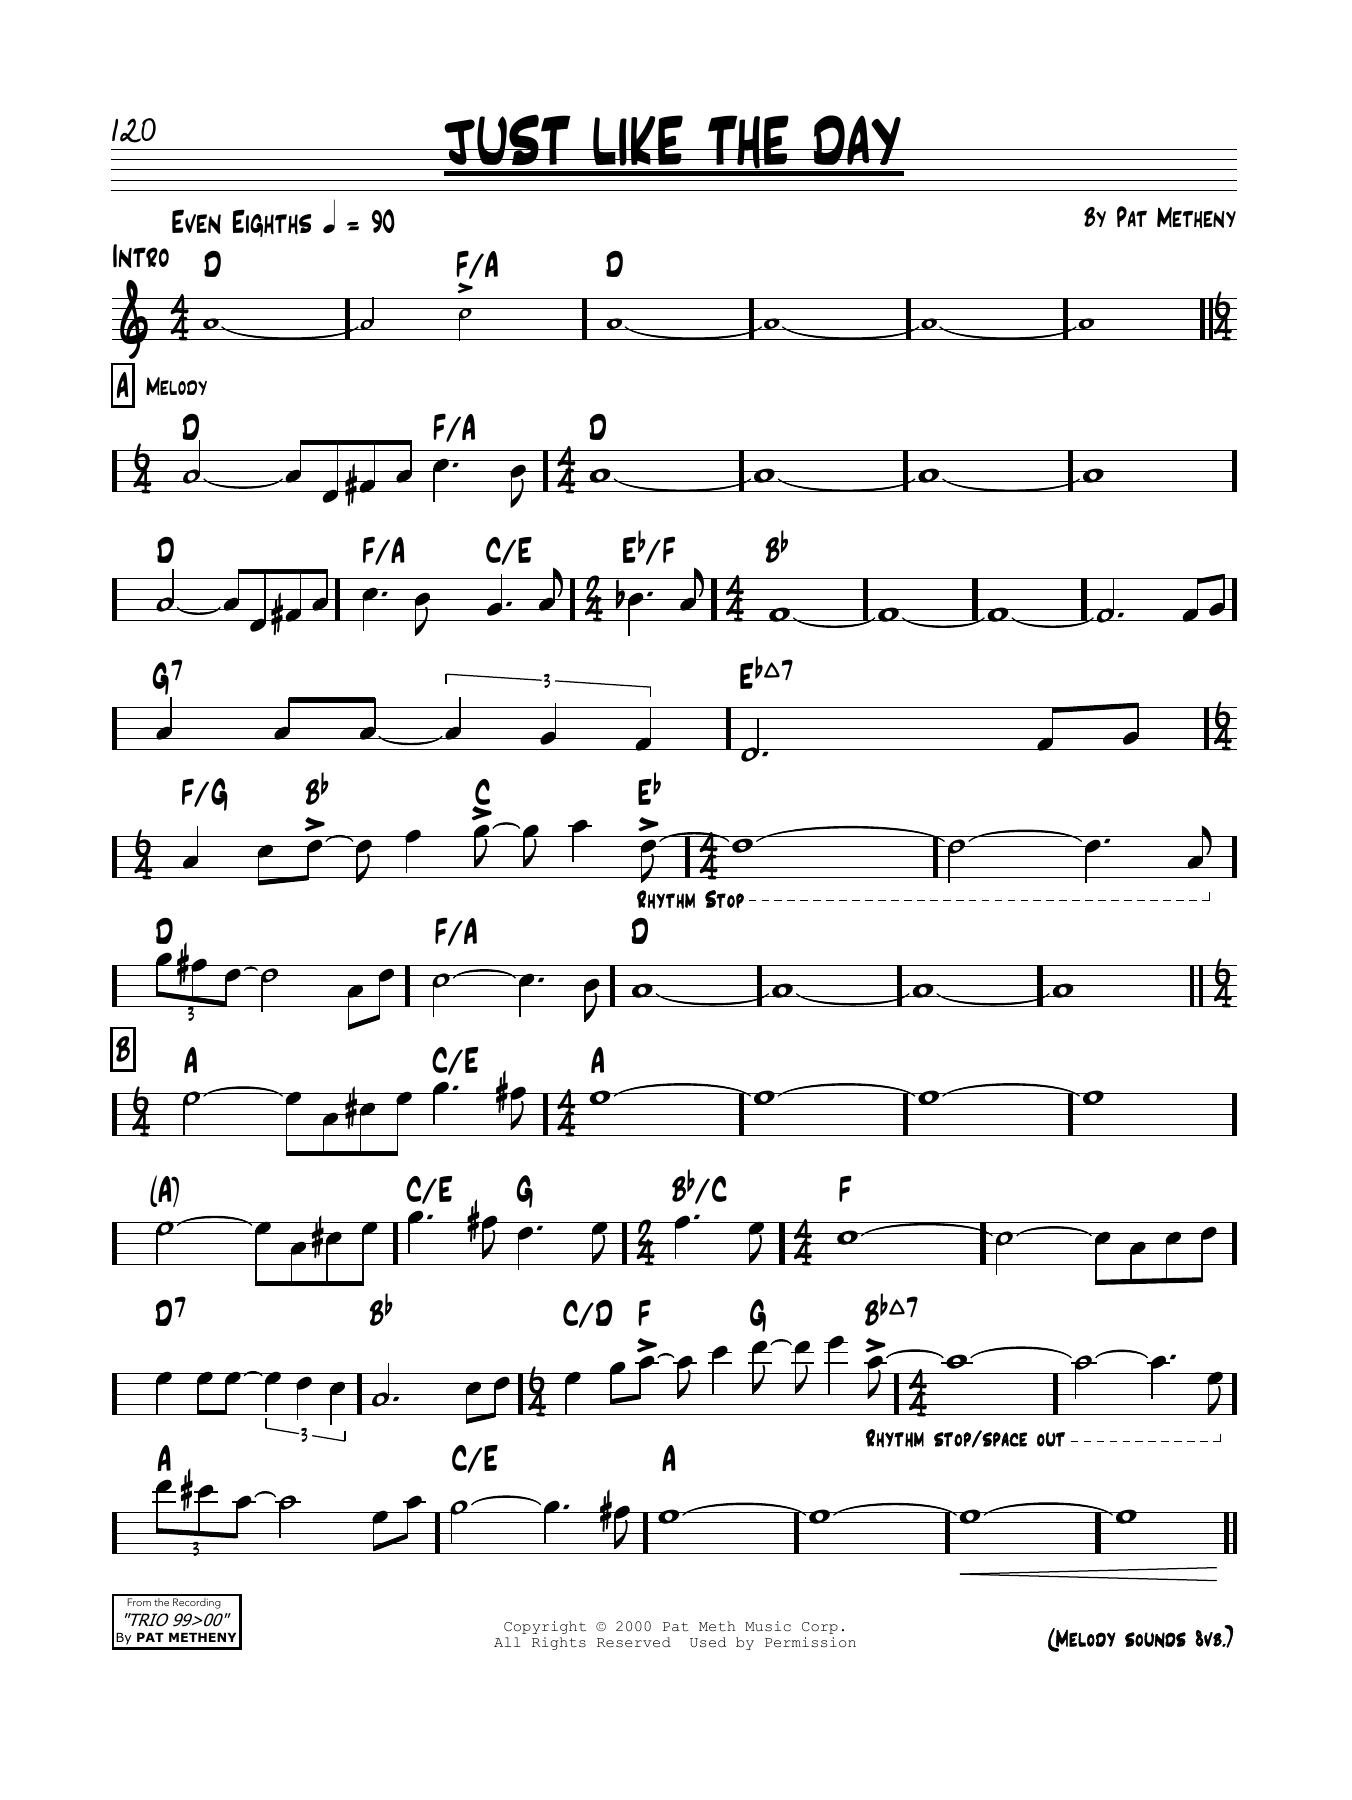 Download Pat Metheny Just Like The Day Sheet Music